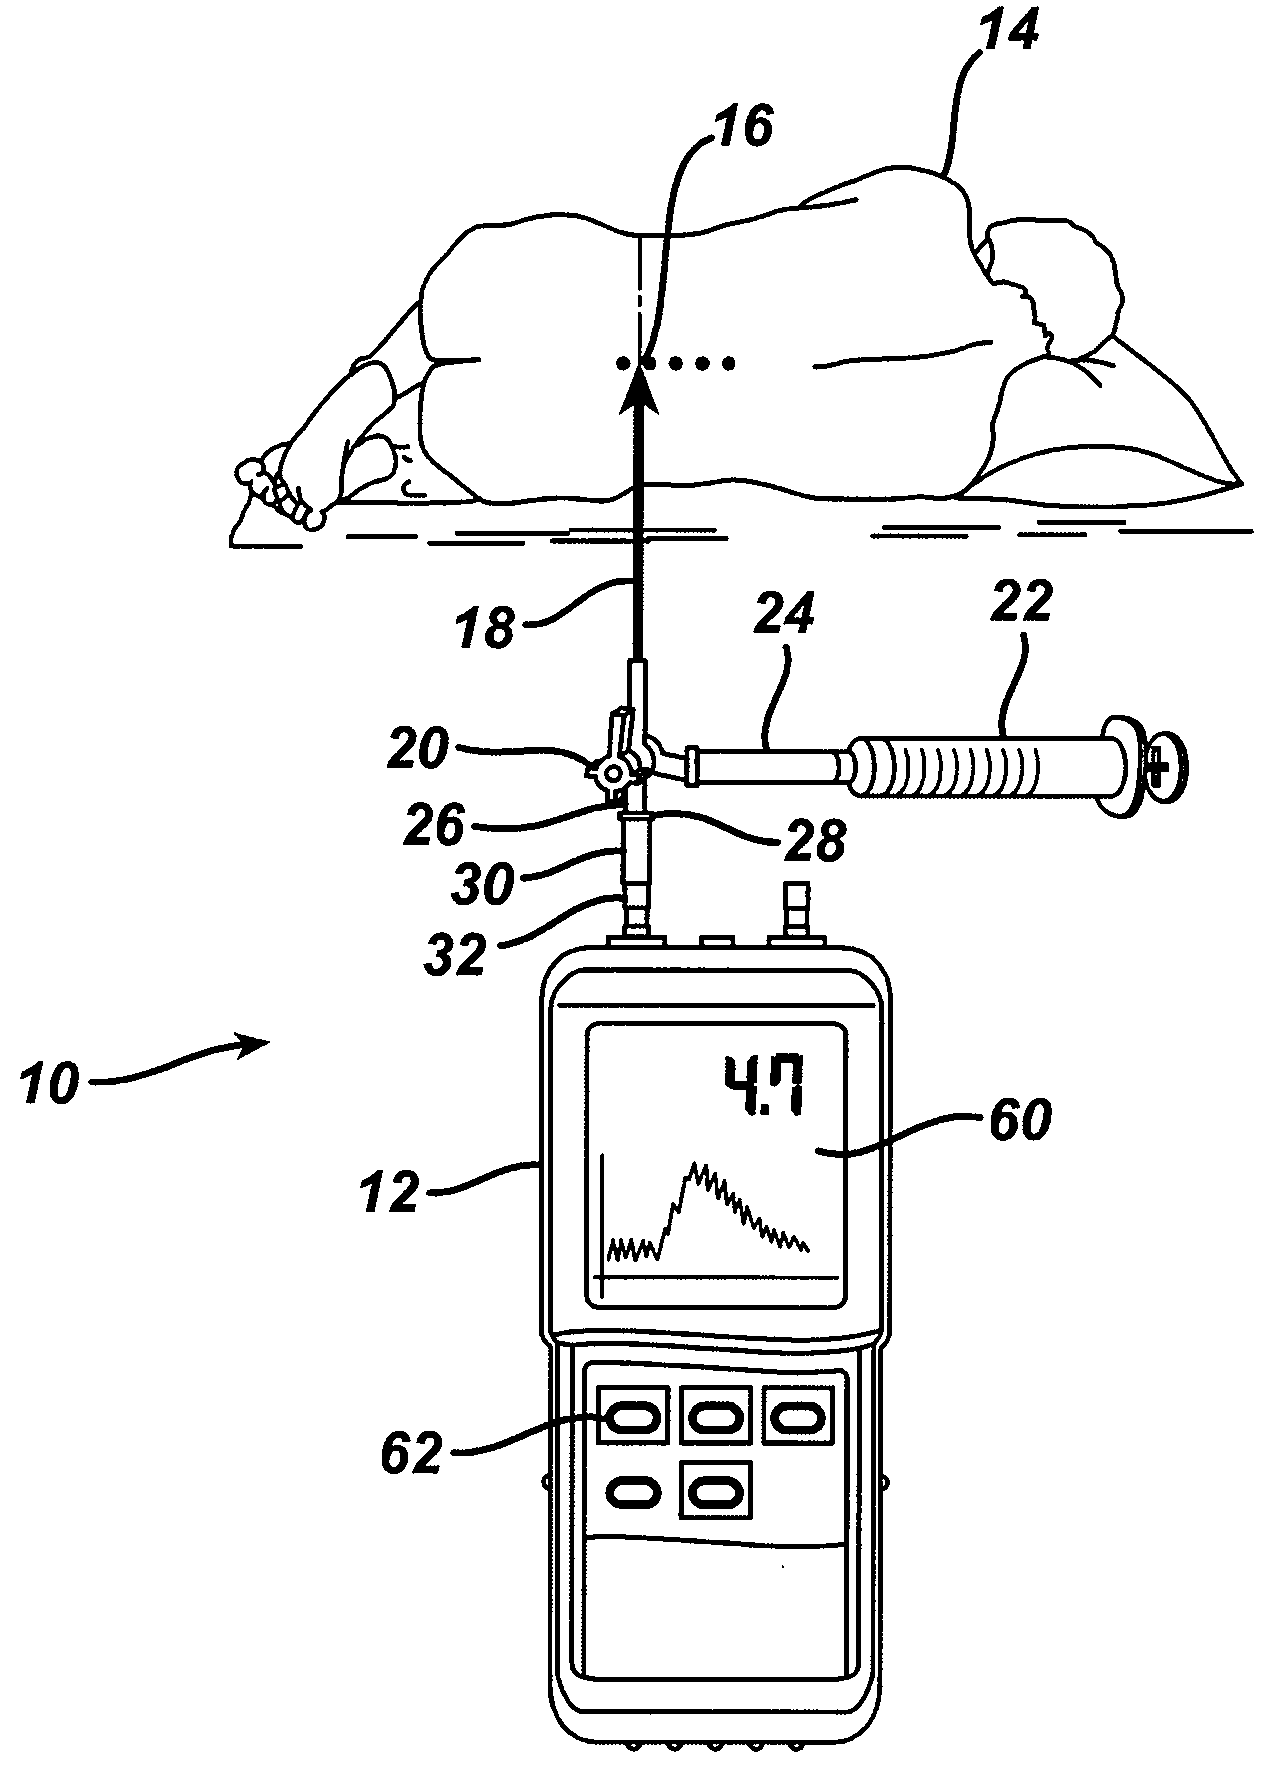 System and Method for Measuring the Pressure of a Fluid System Within a Patient